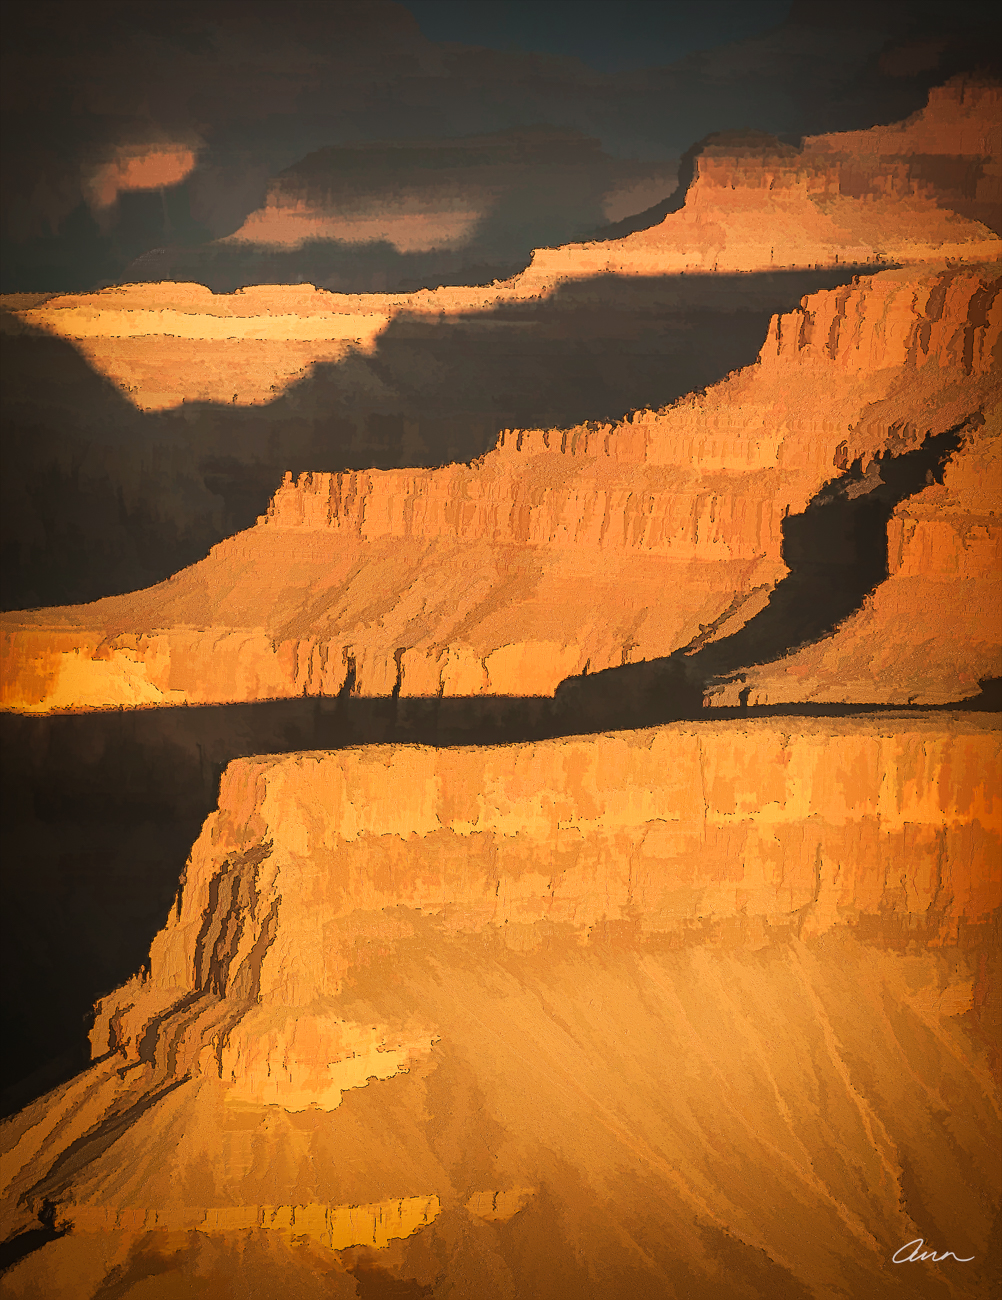 Graphic looking layers of the Grand Canyon with deep shadows